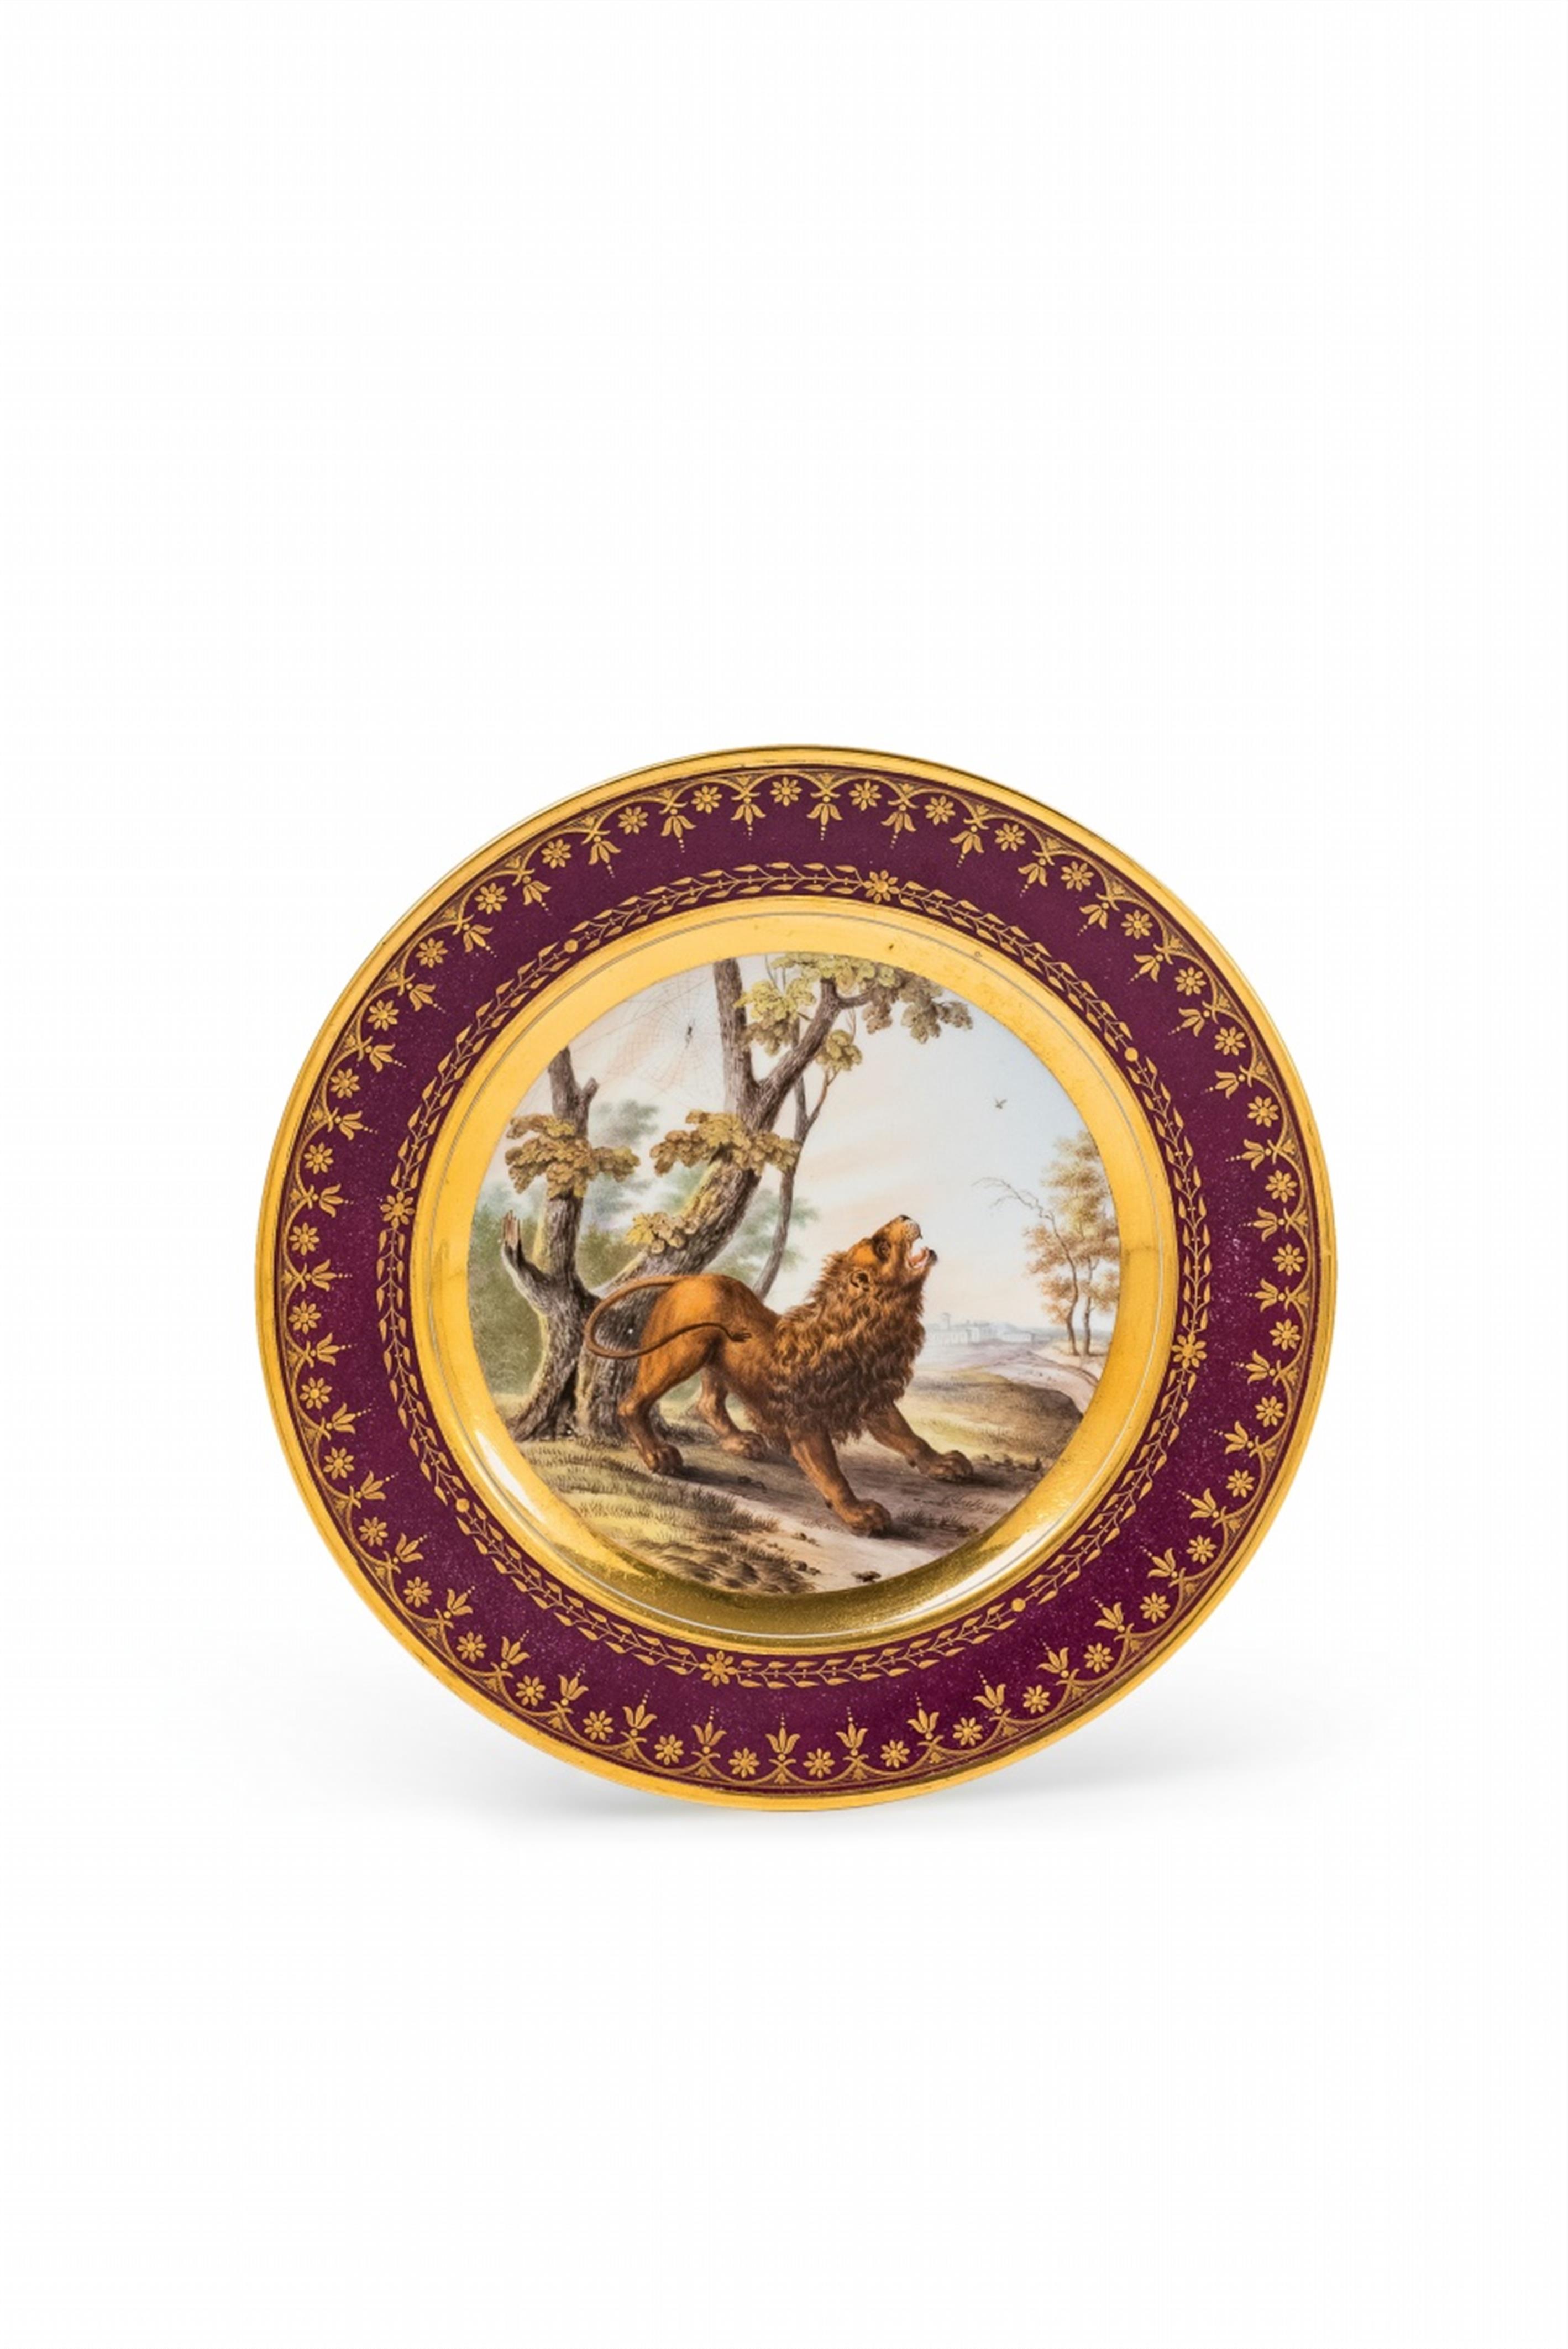 A Sèvres porcelain plate with a fable from the "fond pourpre" service - image-1